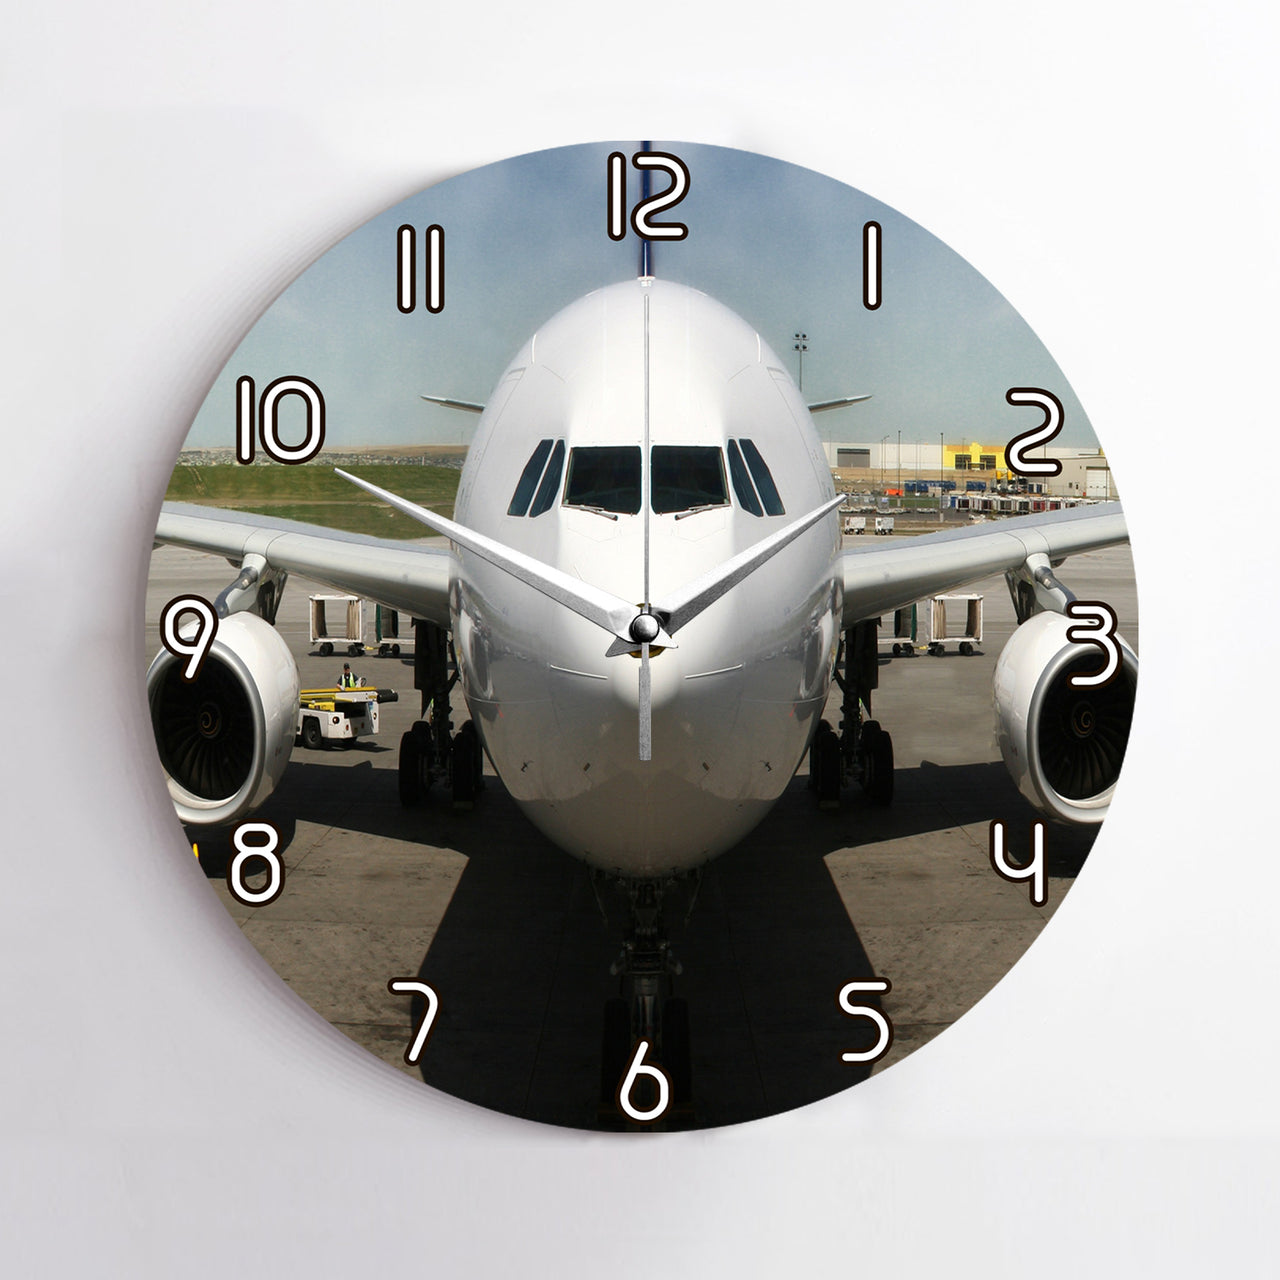 Face to Face with an Huge Airbus Printed Wall Clocks